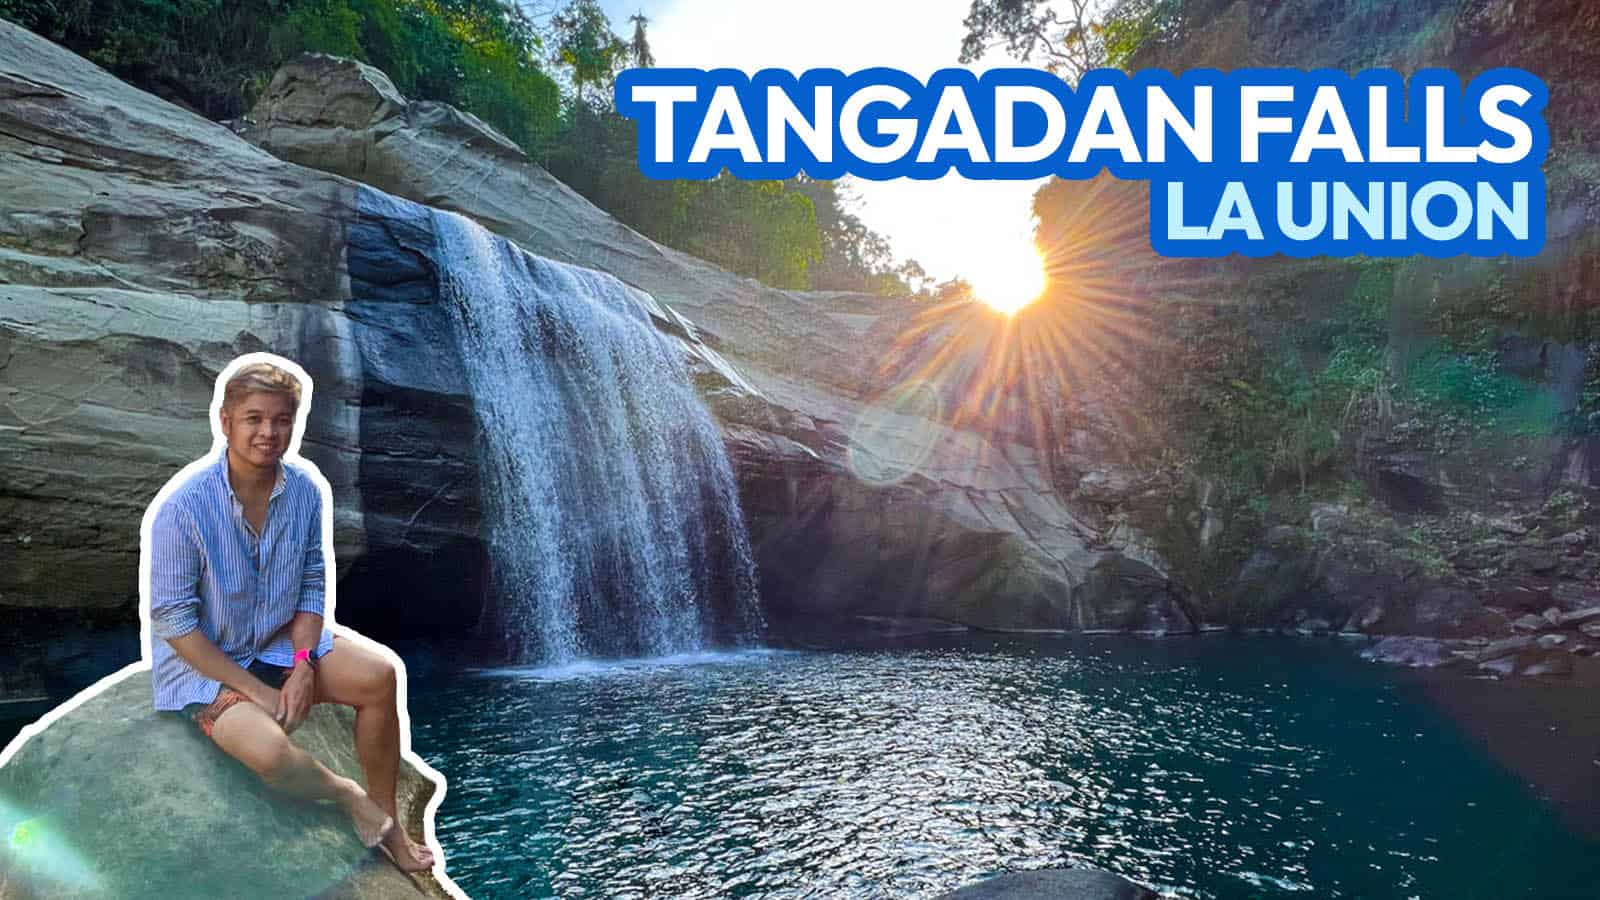 Tangadan Falls Itinerary How to get to TANGADAN FALLS, La Union + sample route and budget